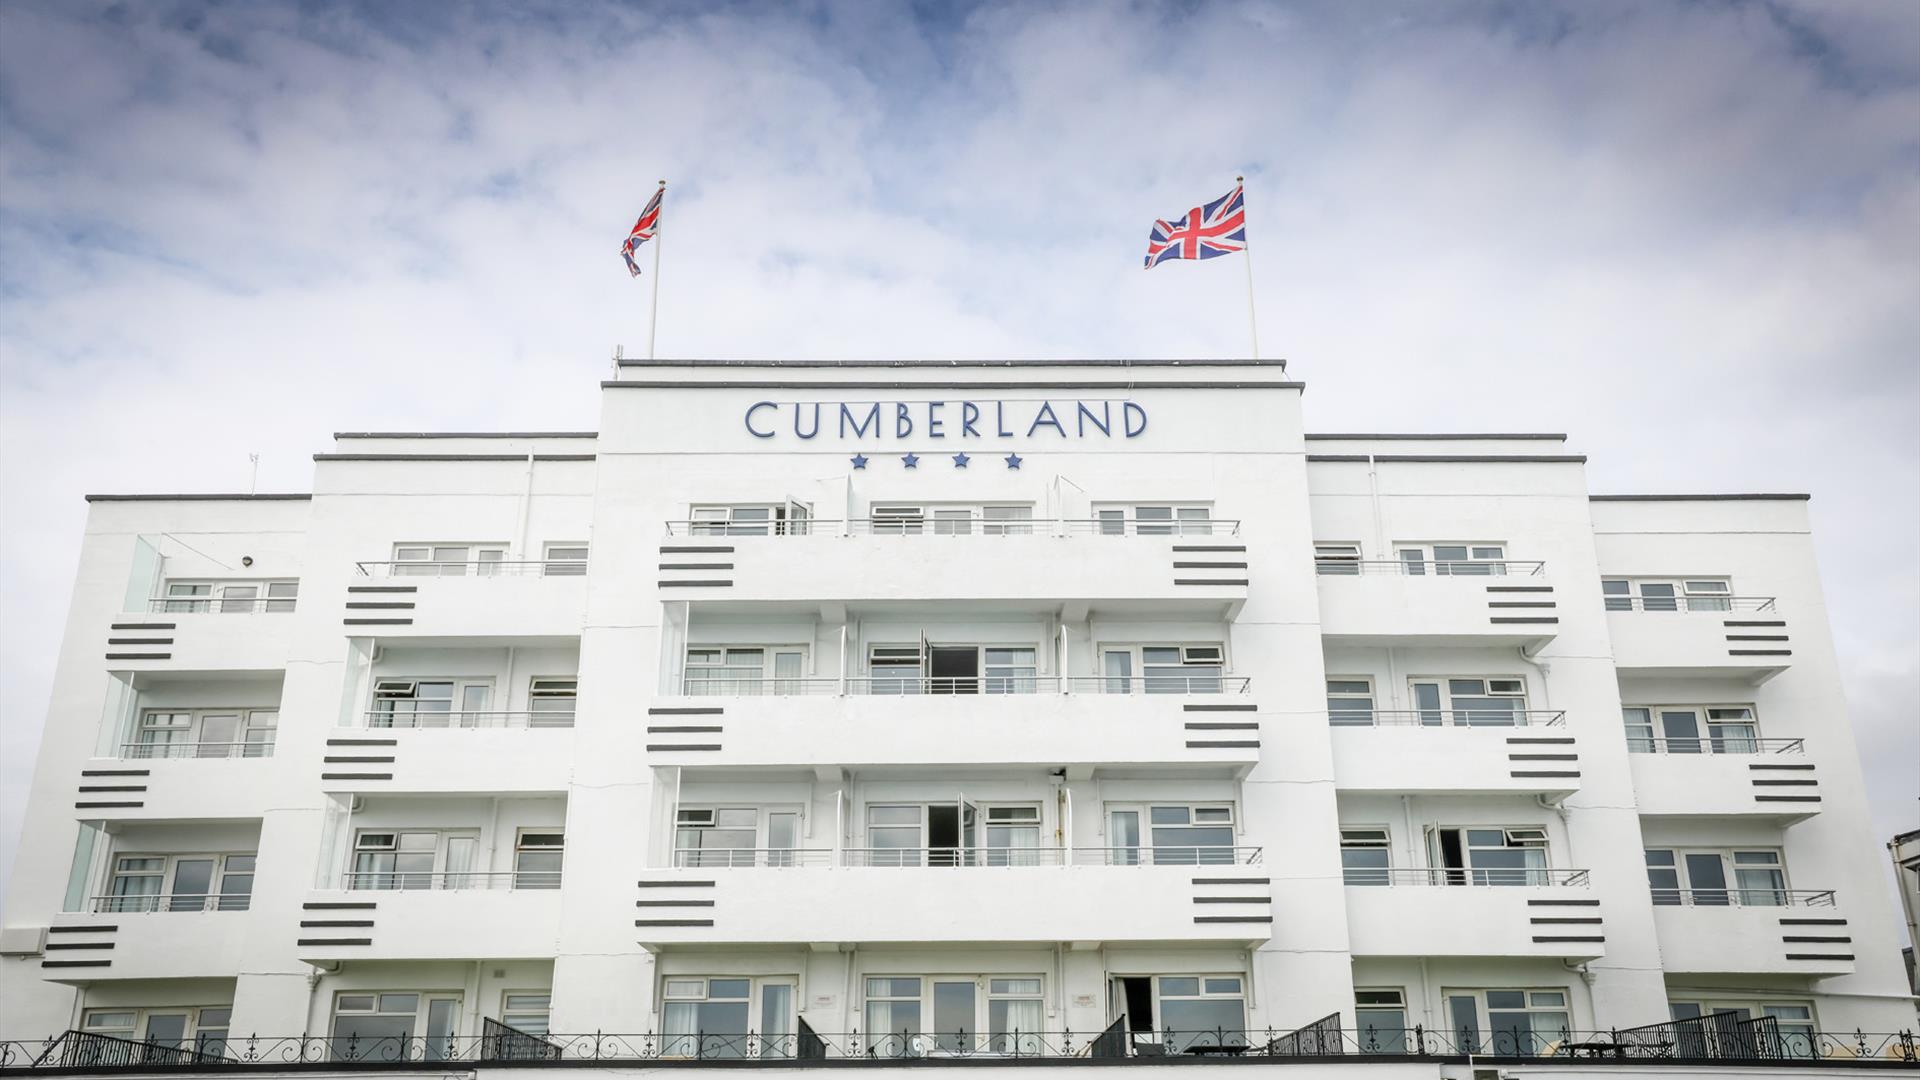 Exterior shot of the white cumberland hotel towering in the sky